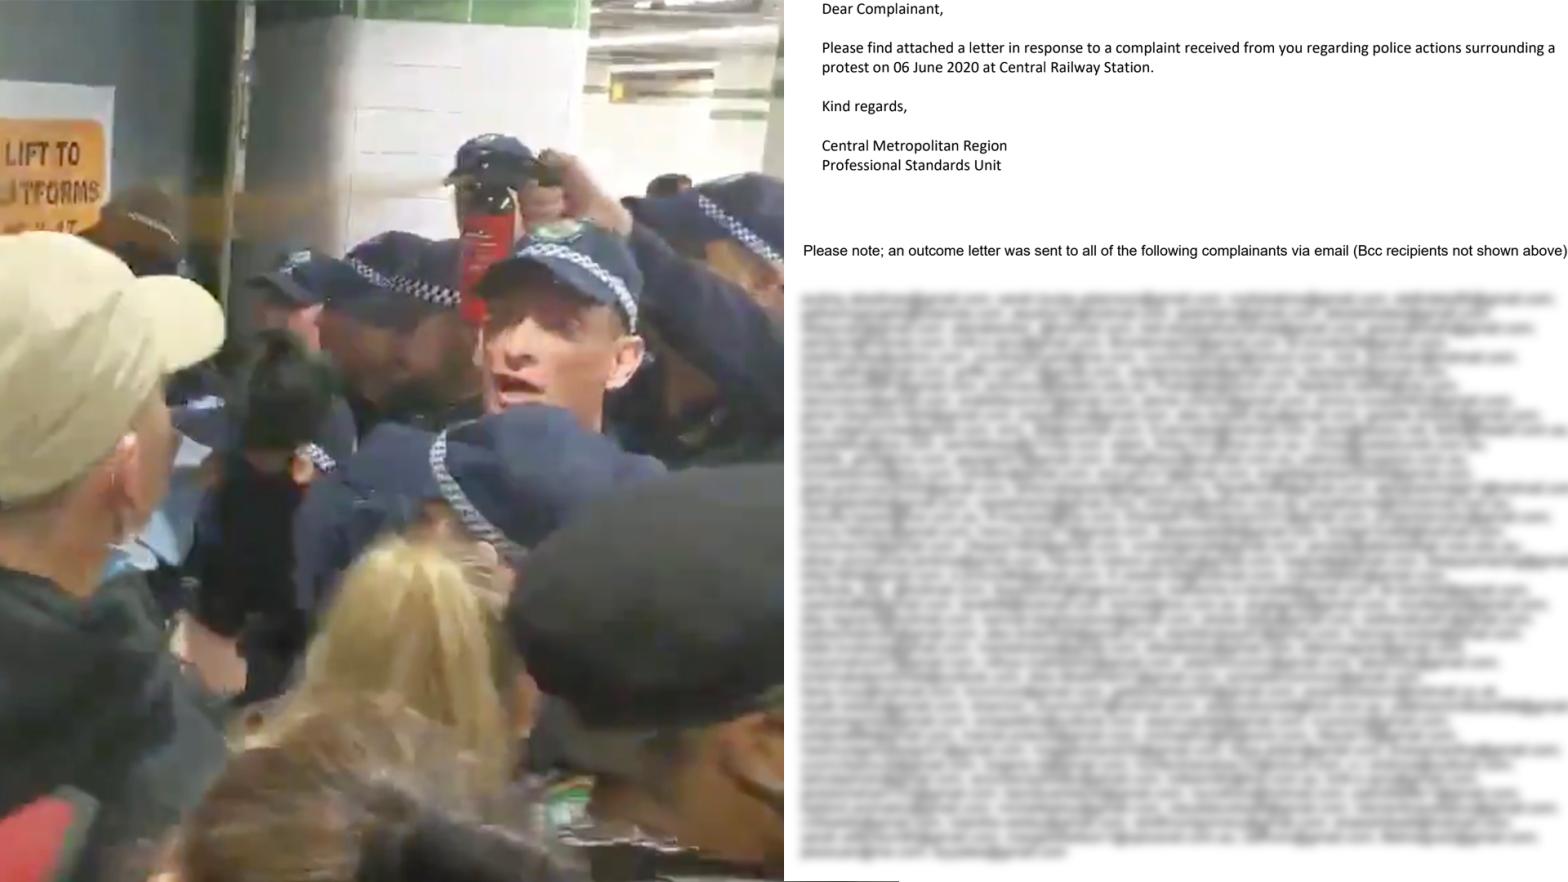 A split image of NSW Police pepper spraying protestors and a blurred copy of the letter leaking email addresses of complainants